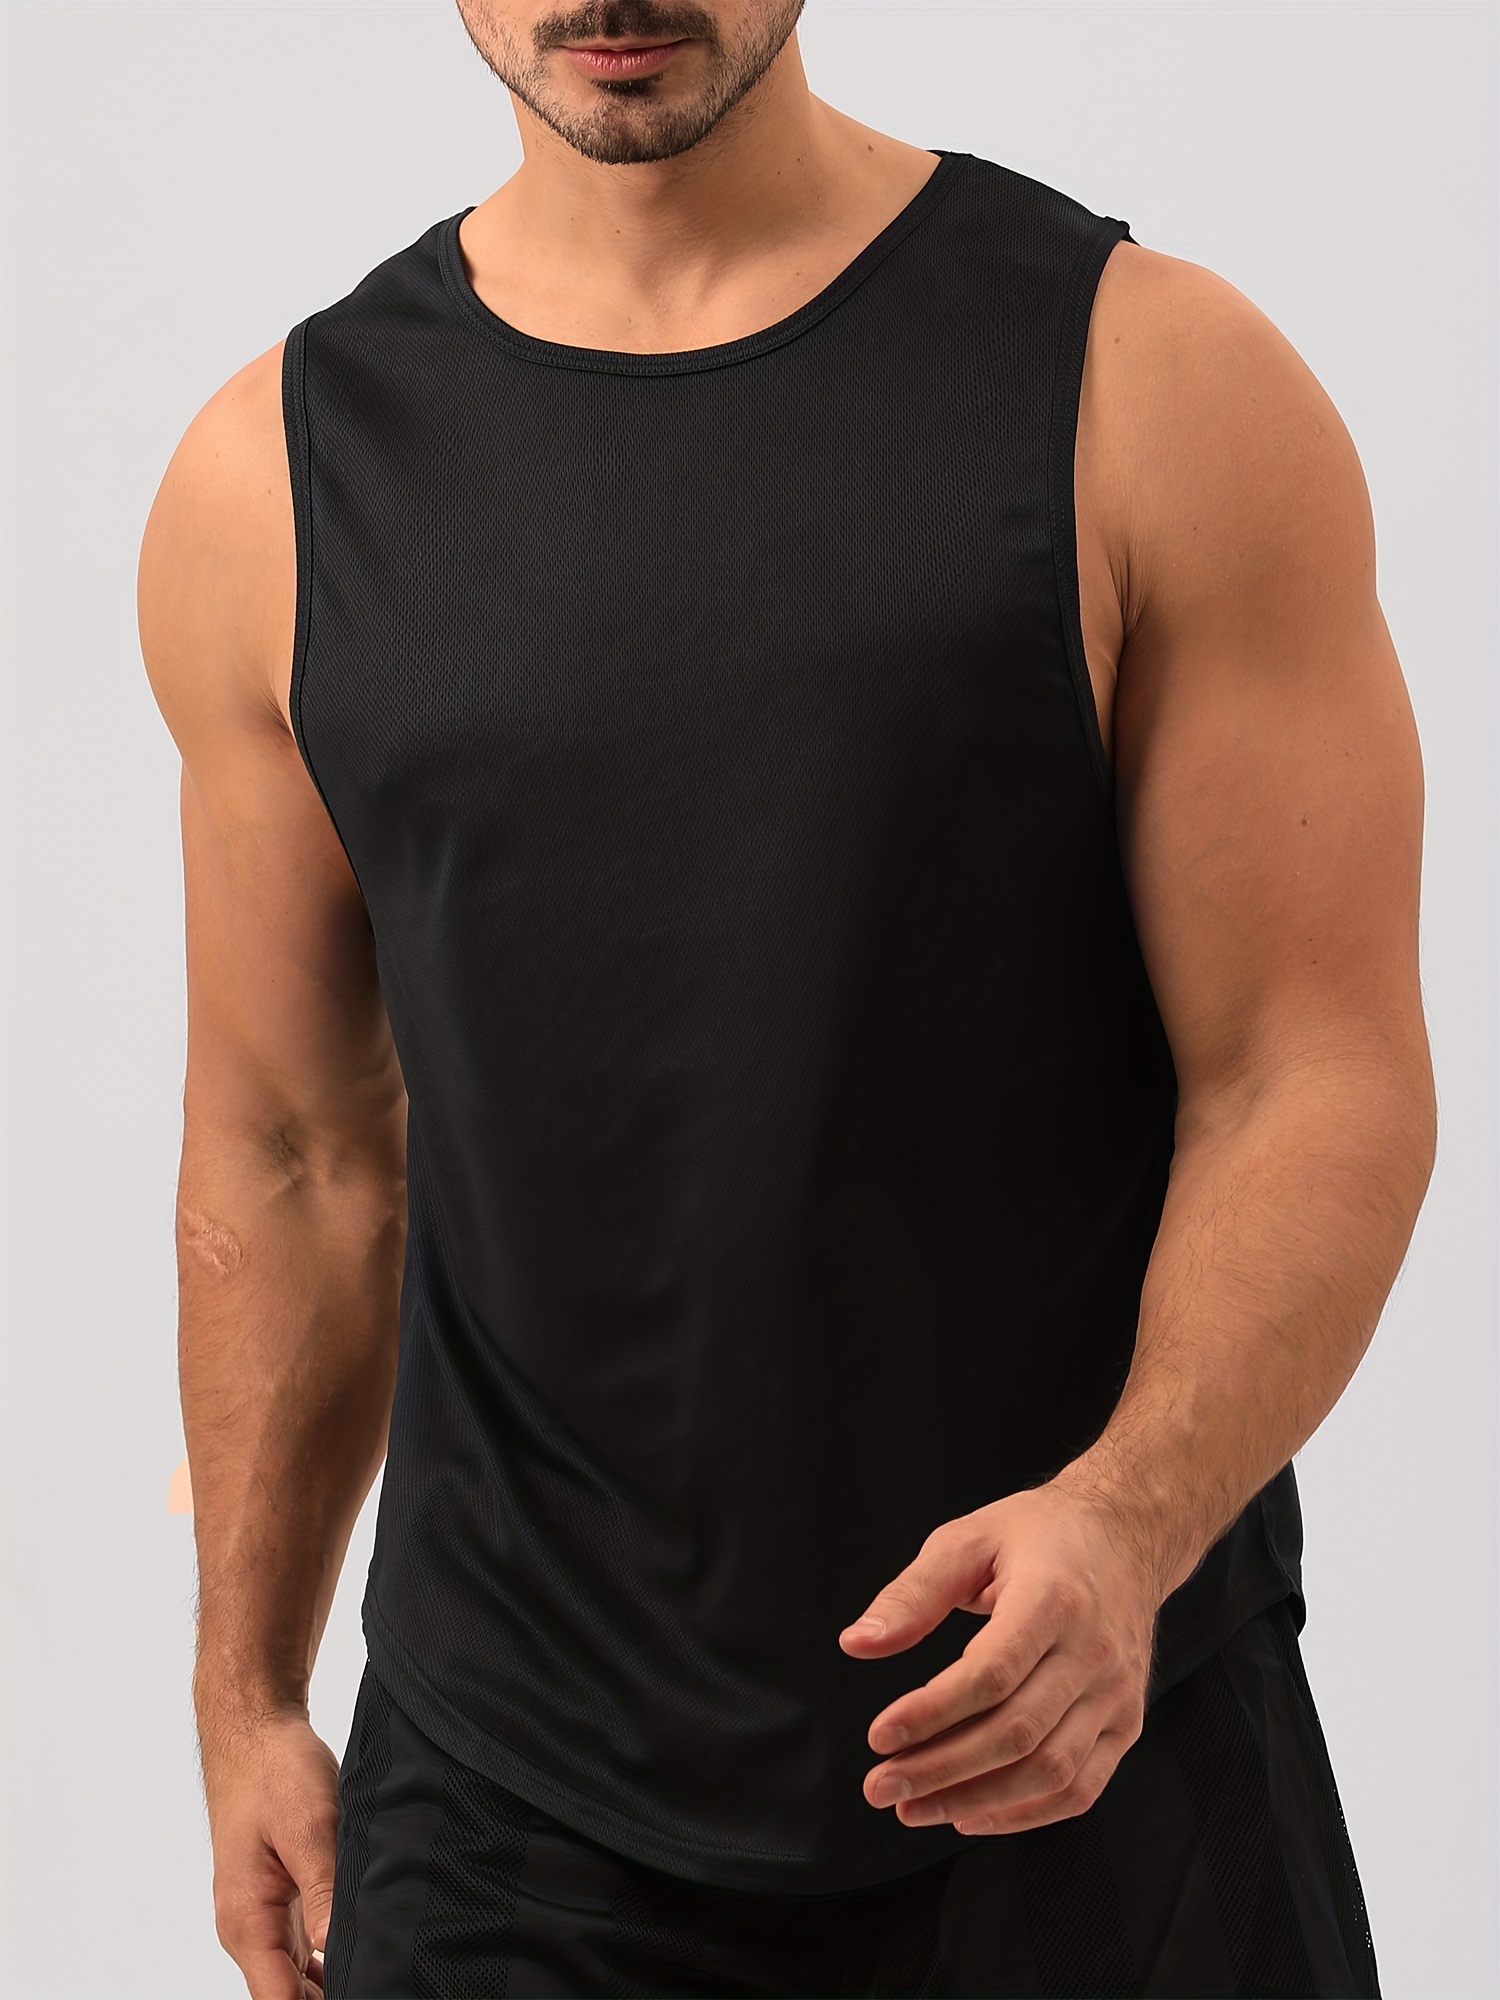 TKing Fashion Mens Shirts Sports Vest Men'S Tight-Fitting Sleeveless  Fitness Suit Basketball Running Yoga Quick-Drying Vest Shirts For Men(Black,M)  